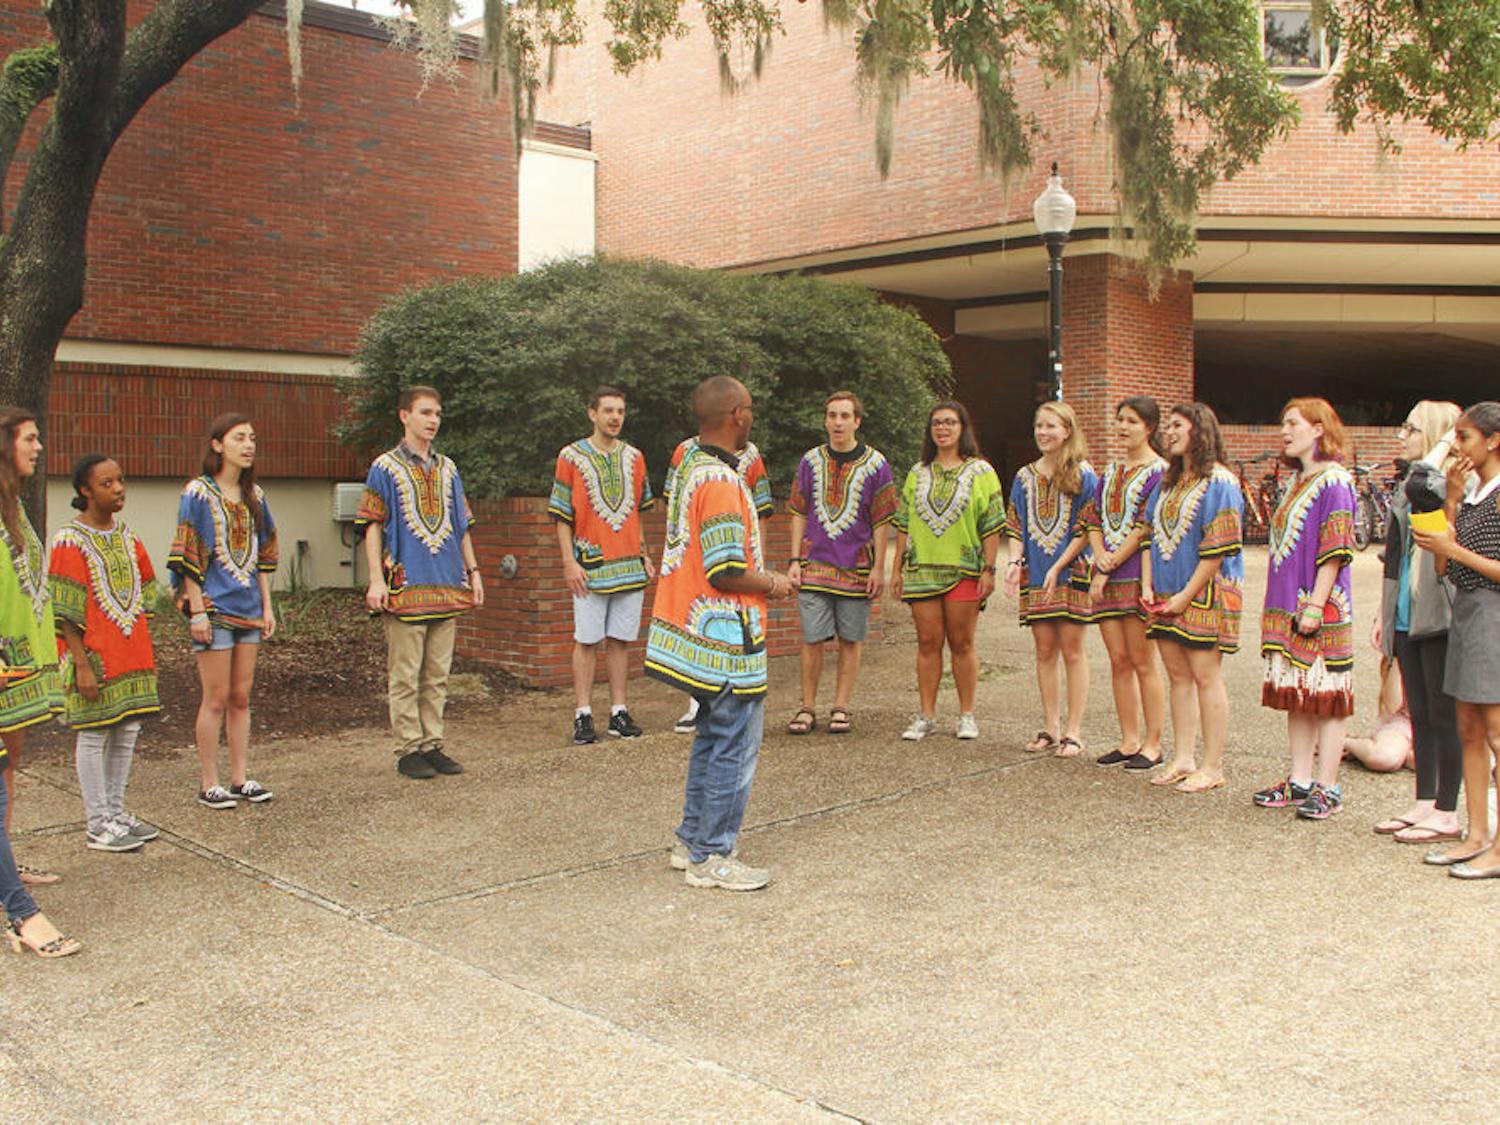 Abbey Chokera, director of the UF Pazeni Sauti Africa Choir, leads the group during a song at a promotional recruitment Tuesday in Turlington Plaza. Chokera said the group’s goal is to share the music with joy.